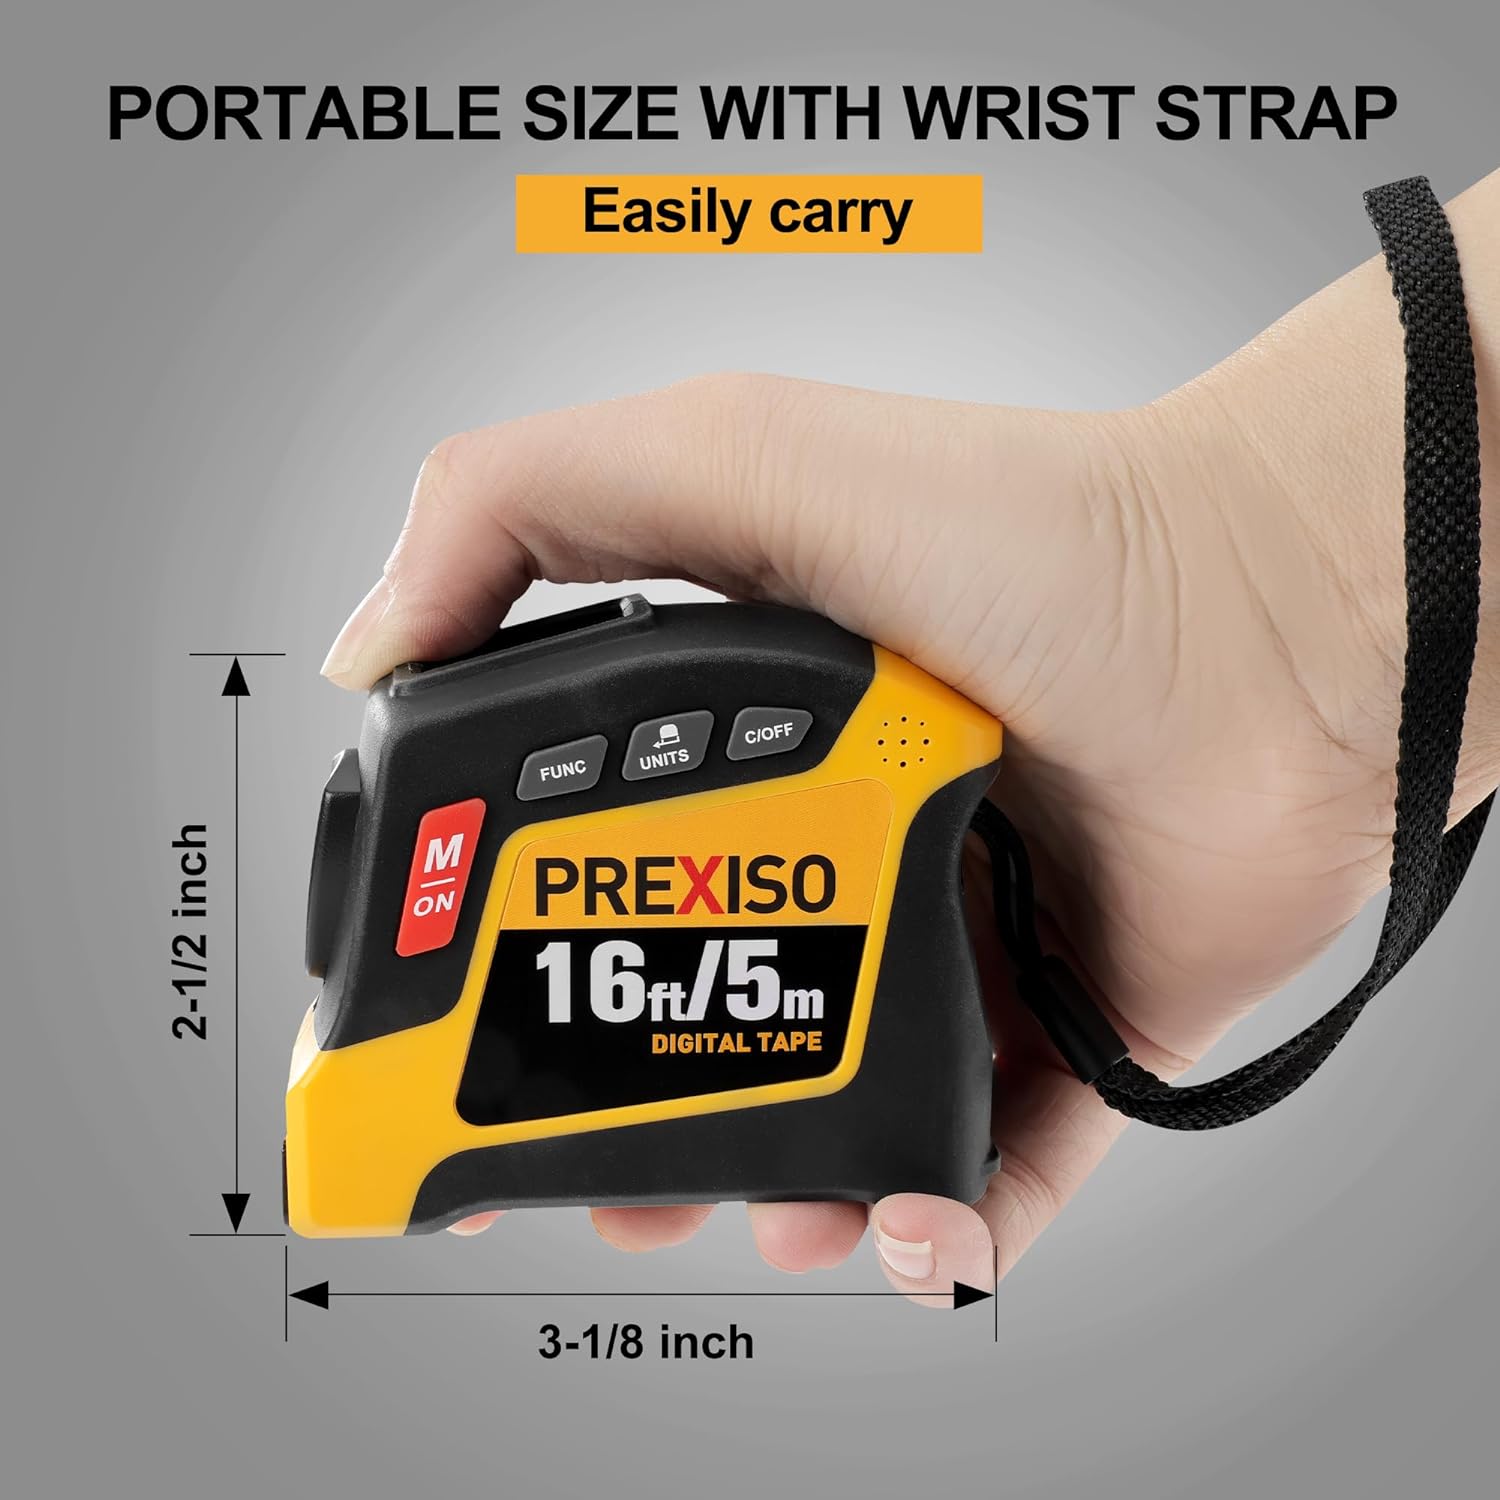 2-in-1 Digital Tape Measure - 16Ft Rechargeable Measuring Tape manufacturer 